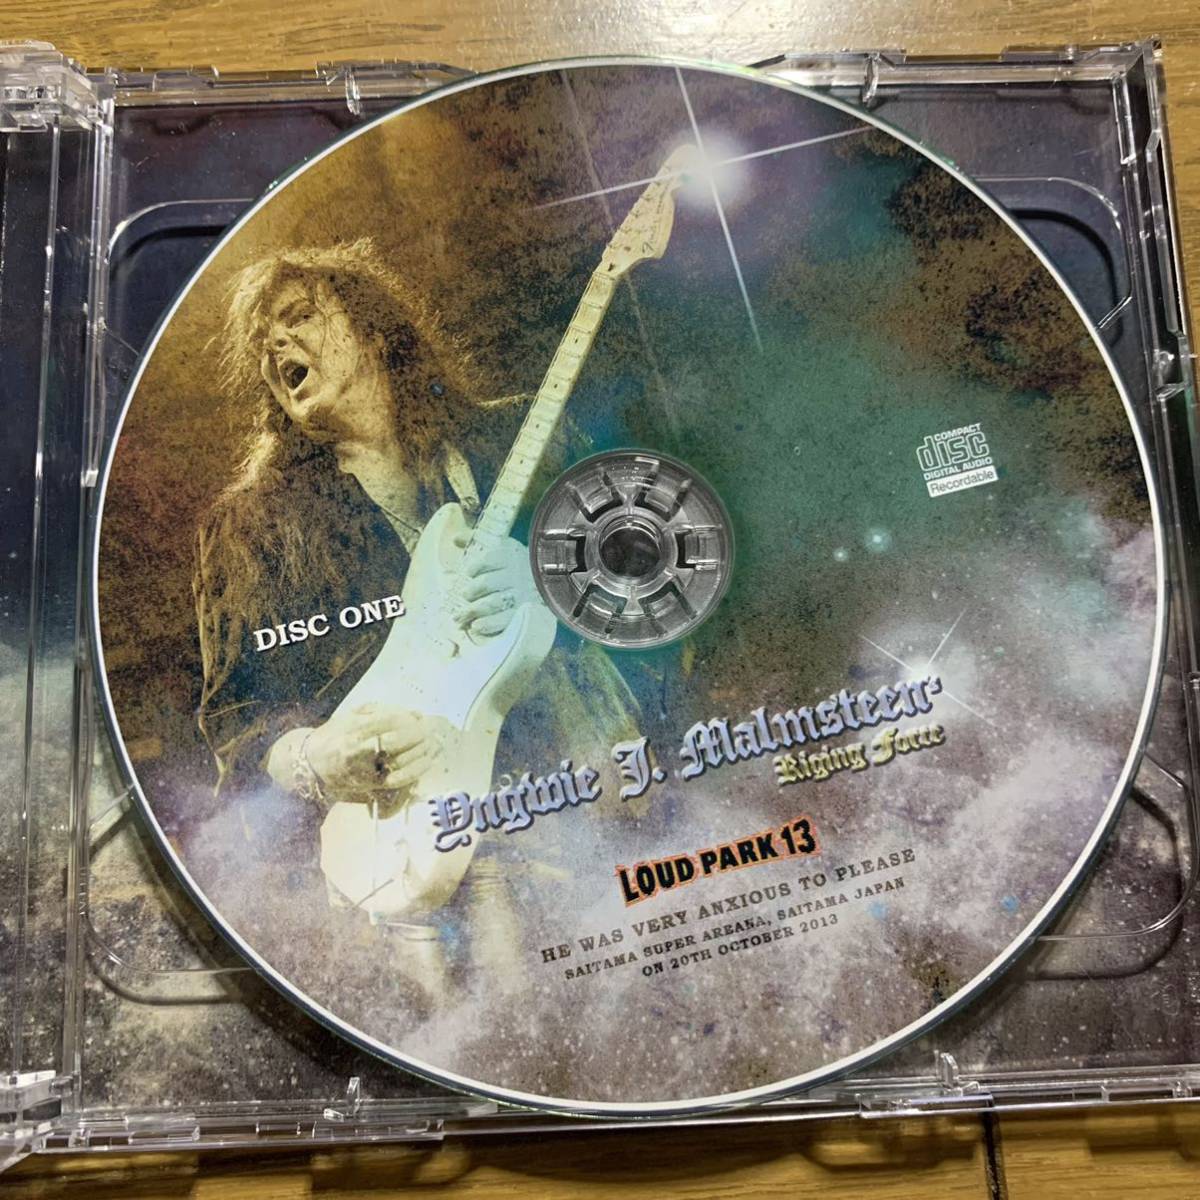 YNGWIE J MALMSTEEN’S RIGING FORCE / HE WAS VERY ANXIOUS TO PLEASE / LP13_画像6